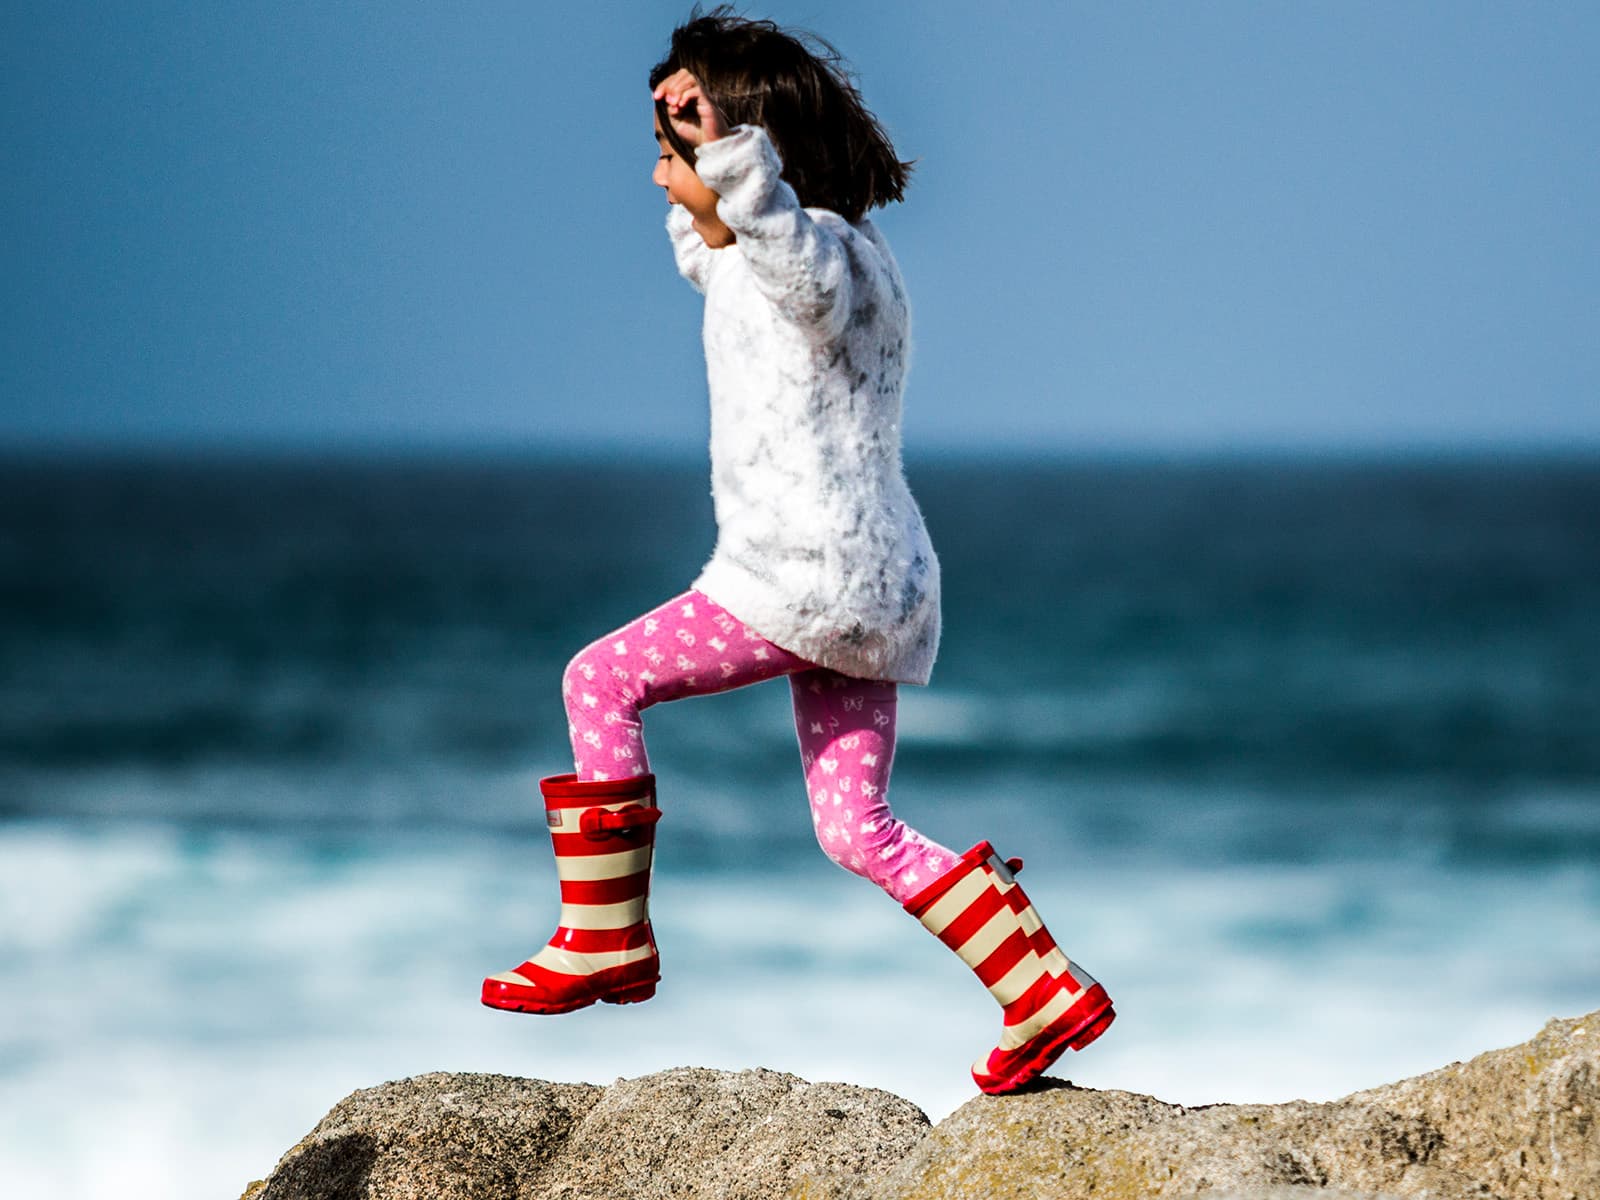 A little girl jumps happily on top of rocks beside the ocean